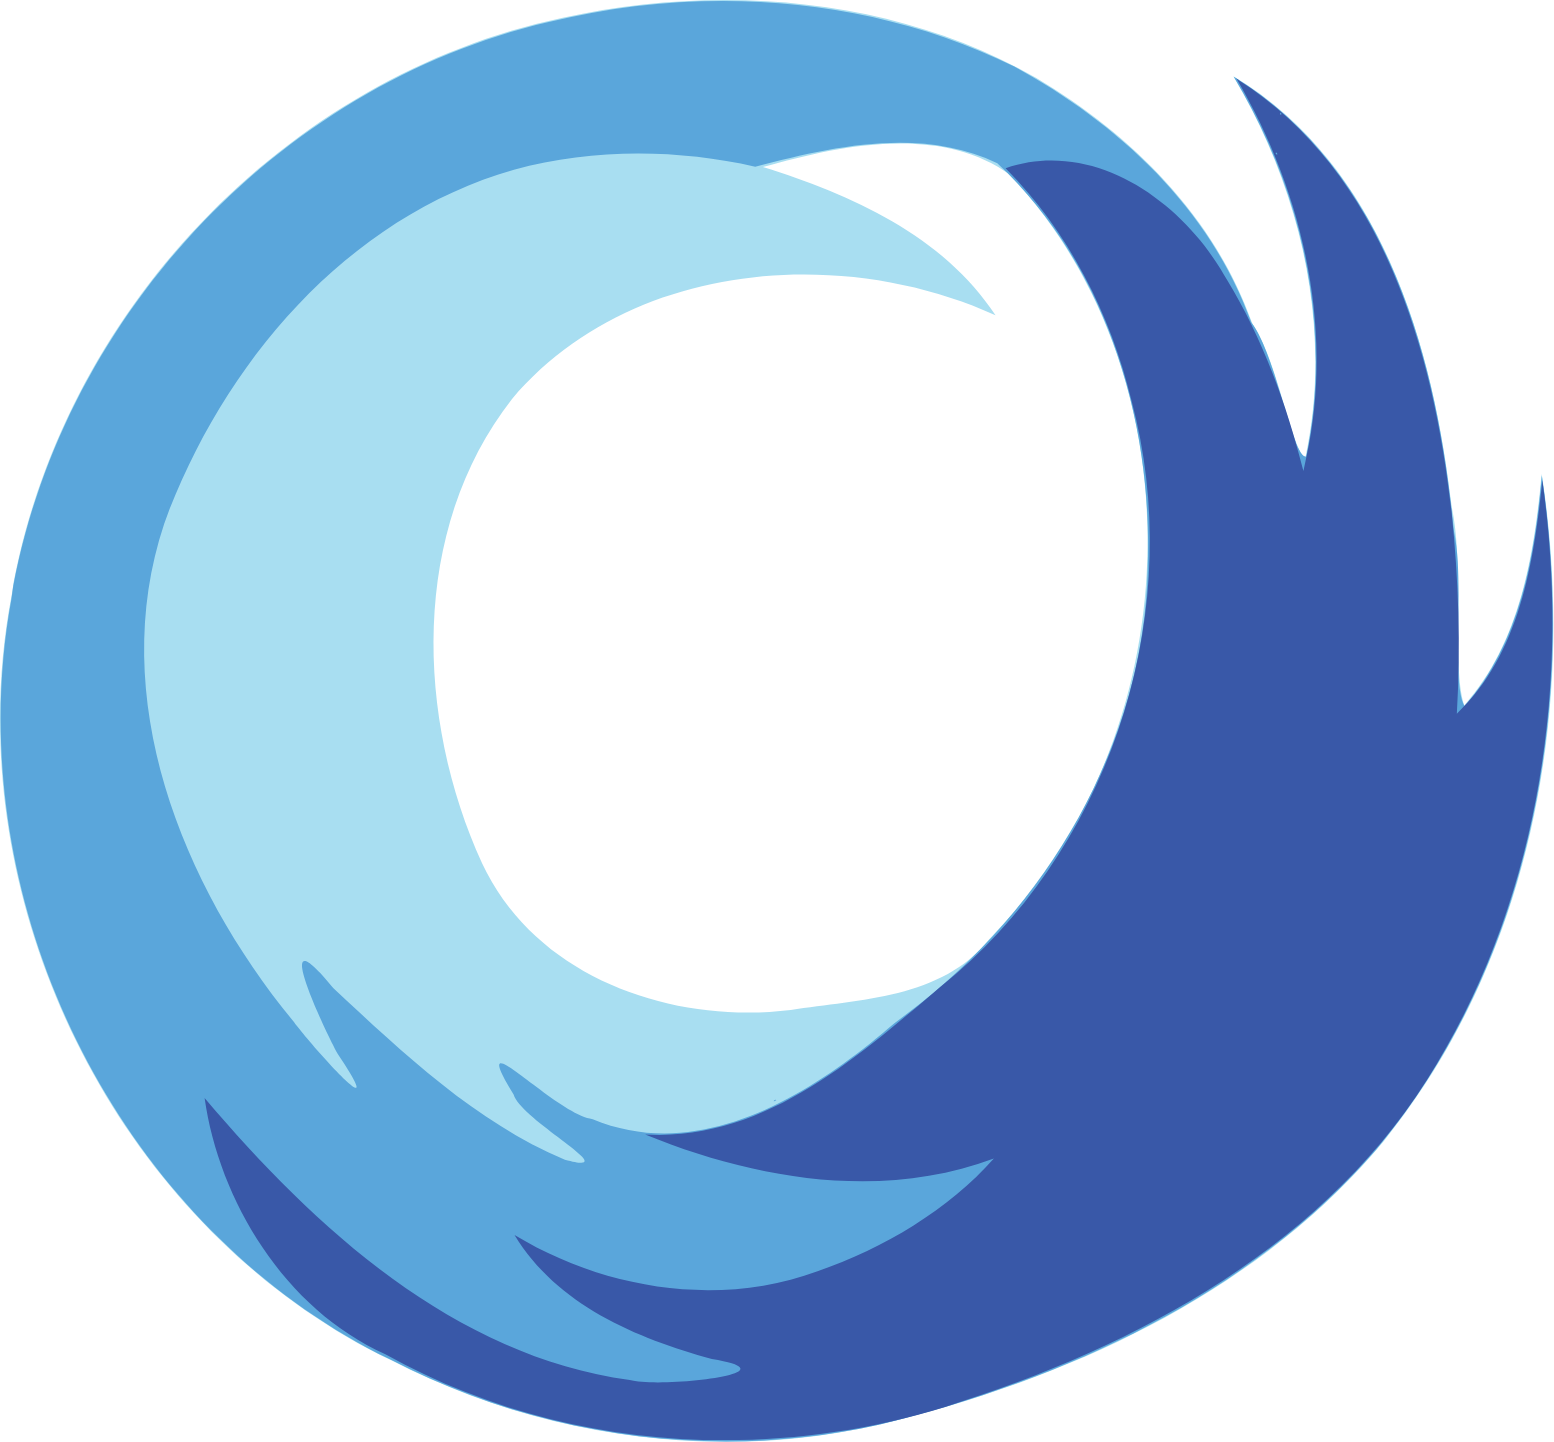 Pure Cycle (water) logo (transparent PNG)